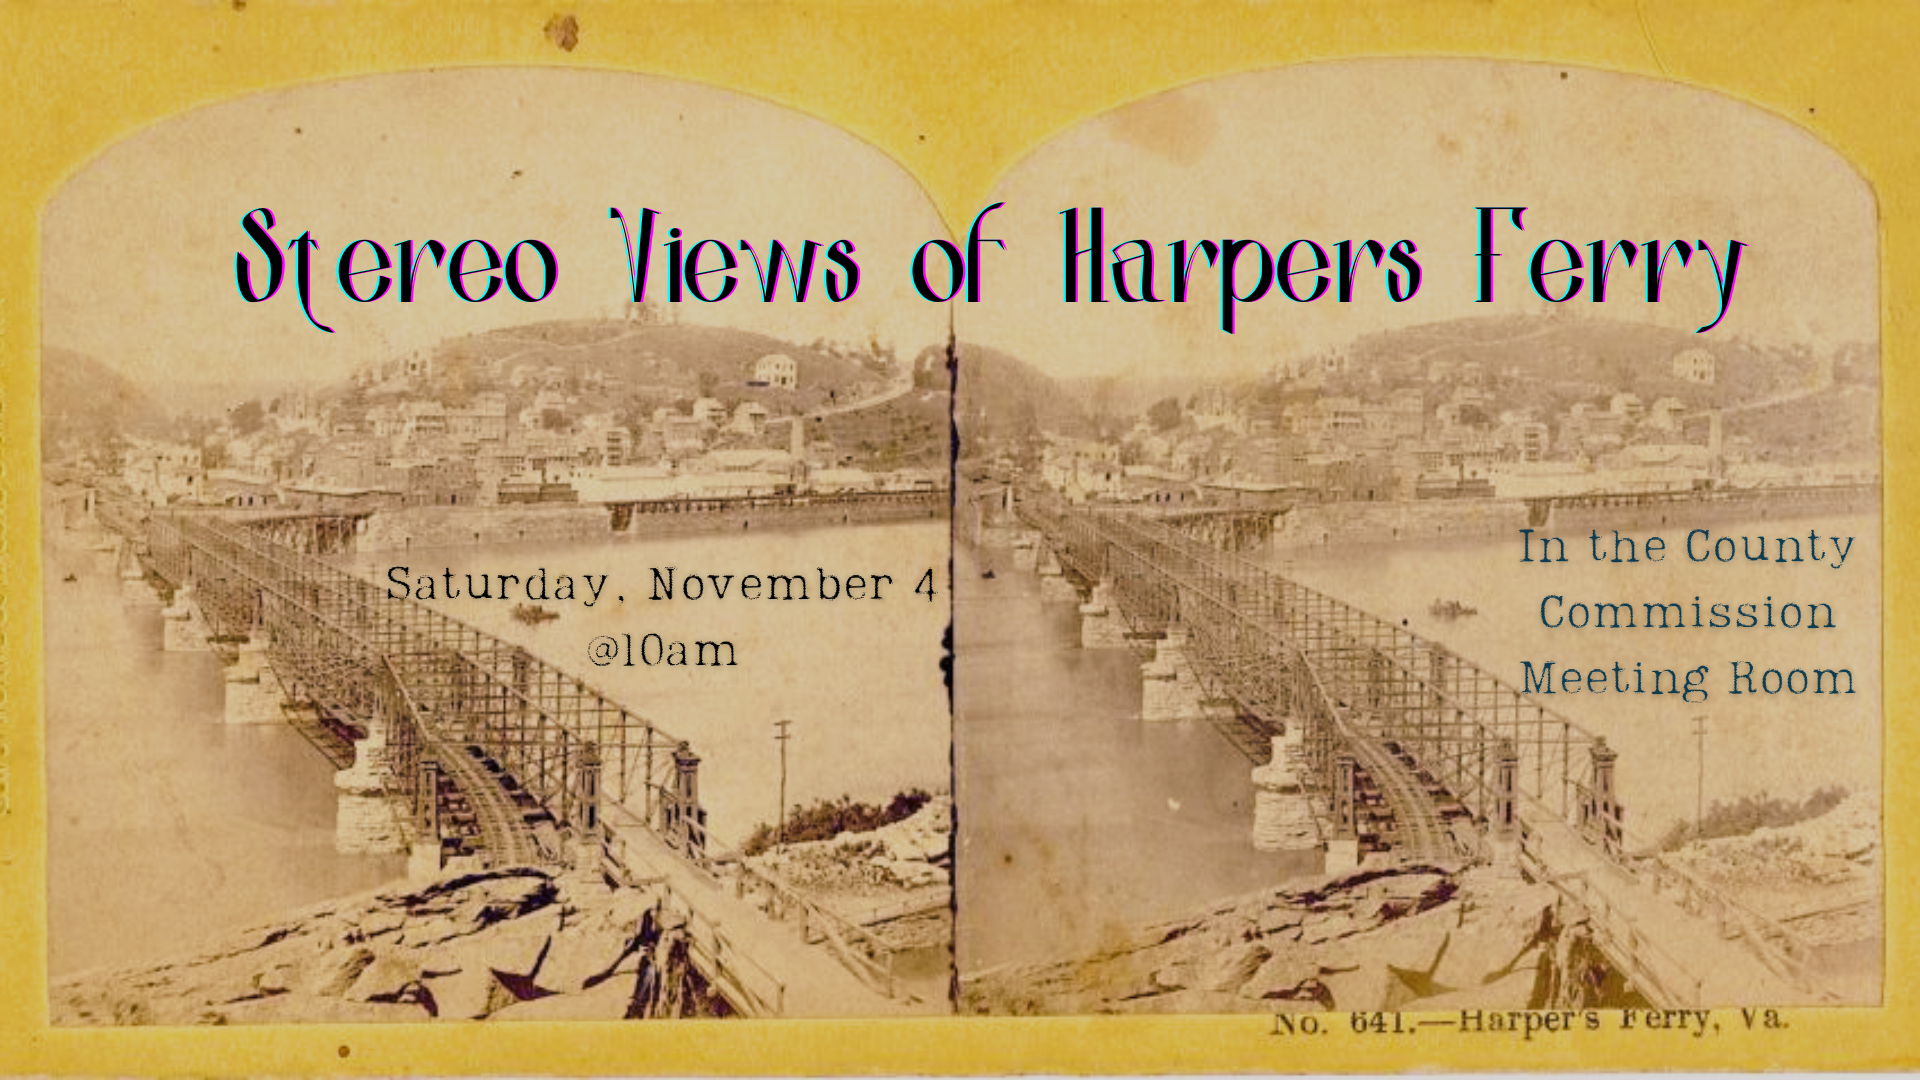 Stereo Views of Harpers Ferry